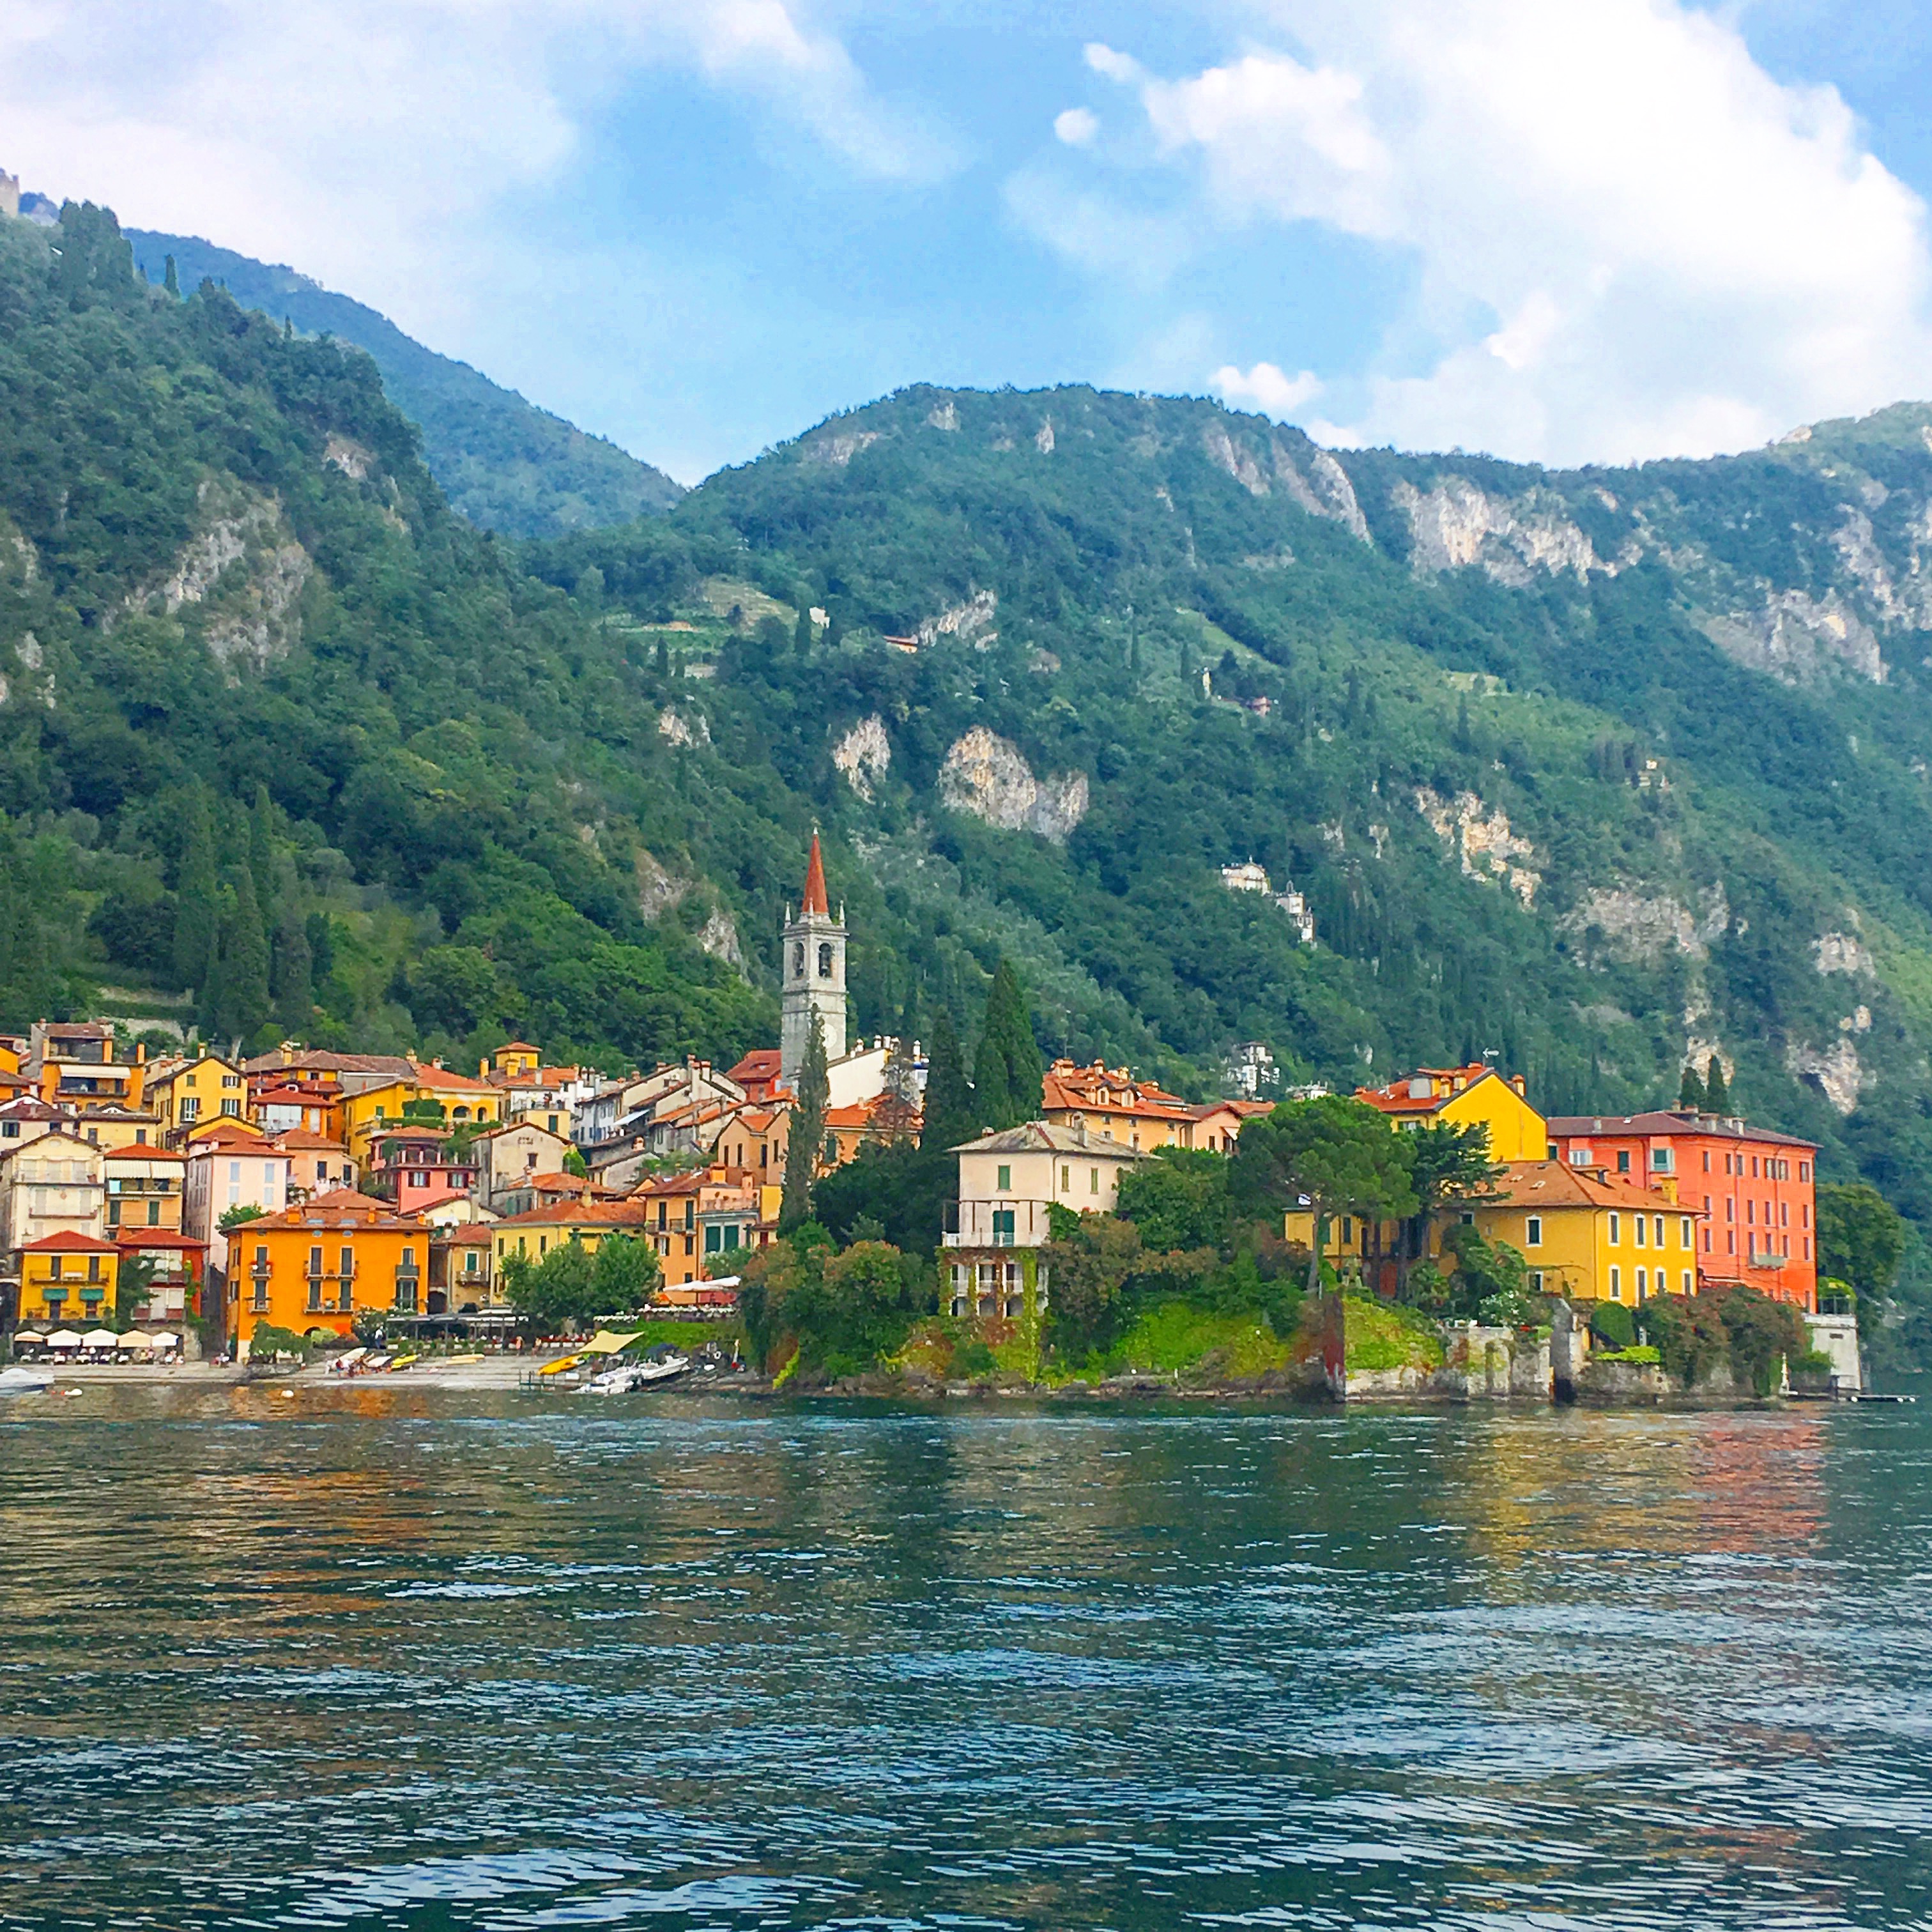 Views of Varenna from the ferry